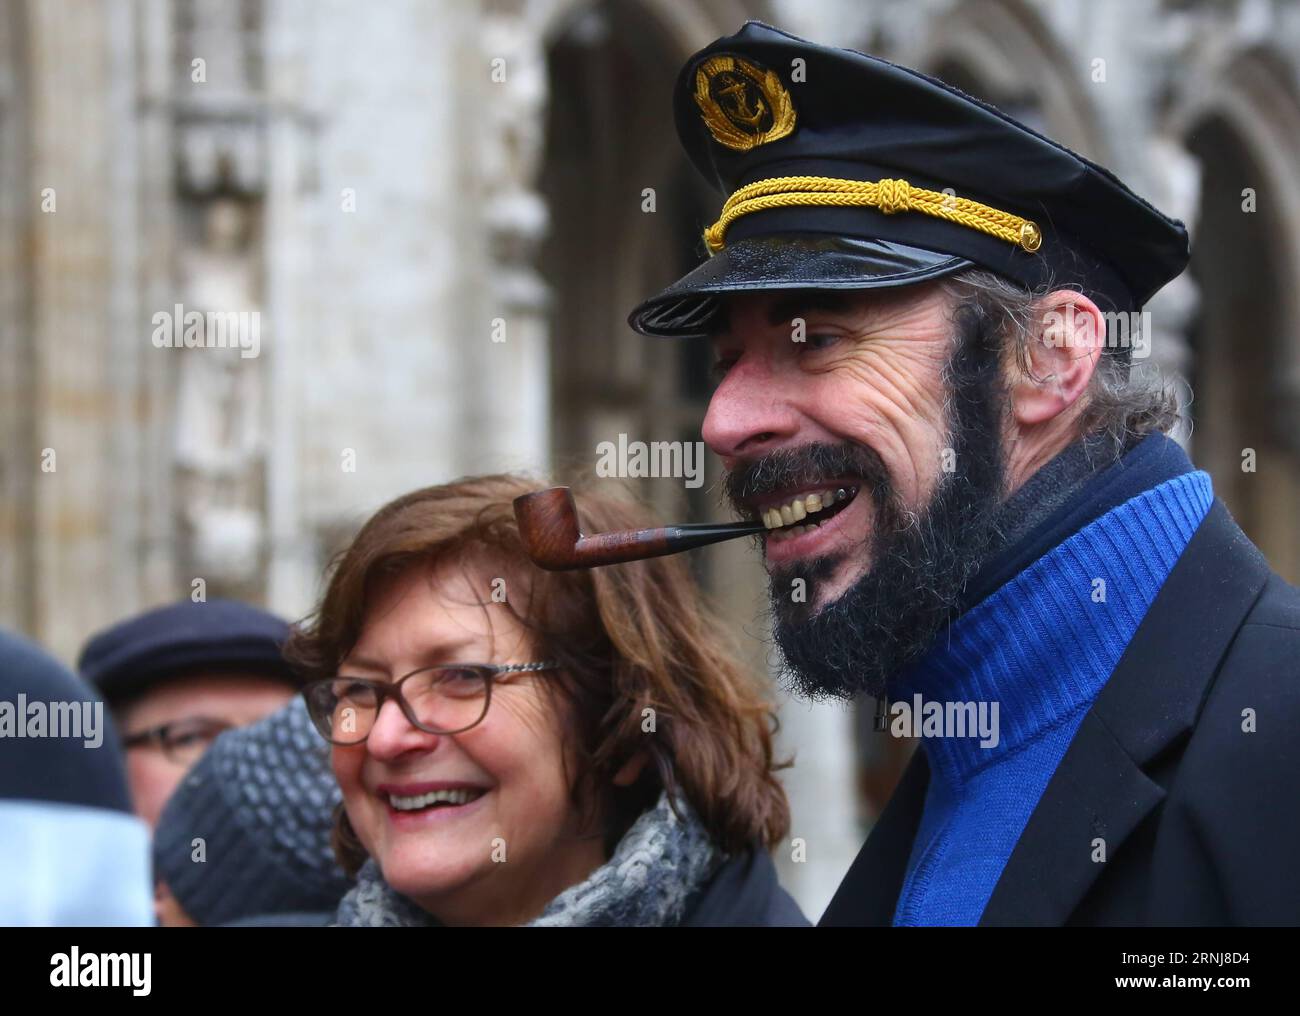 (170108) -- BRUSSELS, Jan. 8, 2017 -- A man cosplayed as Captain Archibald Haddock, a character of The Adventures of Tintin , attends the show in the Grand Place of Brussels, Belgium, Jan. 7, 2017. A comic character show of The Adventures of Tintin was held in Brussels on Saturday. The Adventures of Tintin comics tell stories of a young Belgian reporter and explorer. They have been translated into dozens of languages and adapted for radio, television, theater and film. ) (zxj) BELGIUM-BRUSSELS- THE ADVENTURES OF TINTIN -SHOW GongxBing PUBLICATIONxNOTxINxCHN   Brussels Jan 8 2017 a Man  As Capt Stock Photo